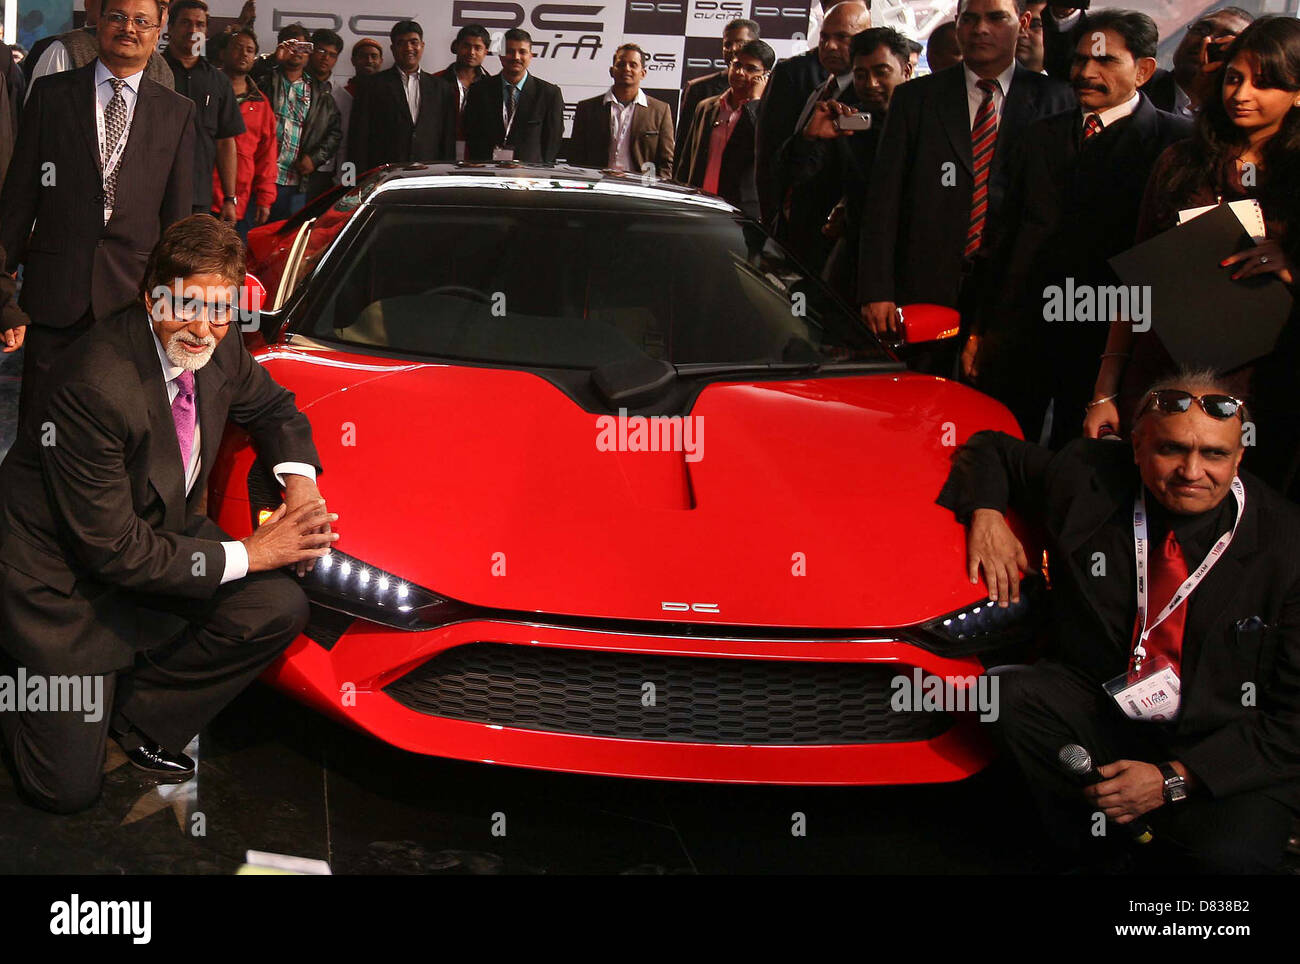 Bollywood actor Amitabh Bhachchan with Dilip Chhabria Auto Expo in New Delhi New Delhi, India - 05.01.12 Stock Photo